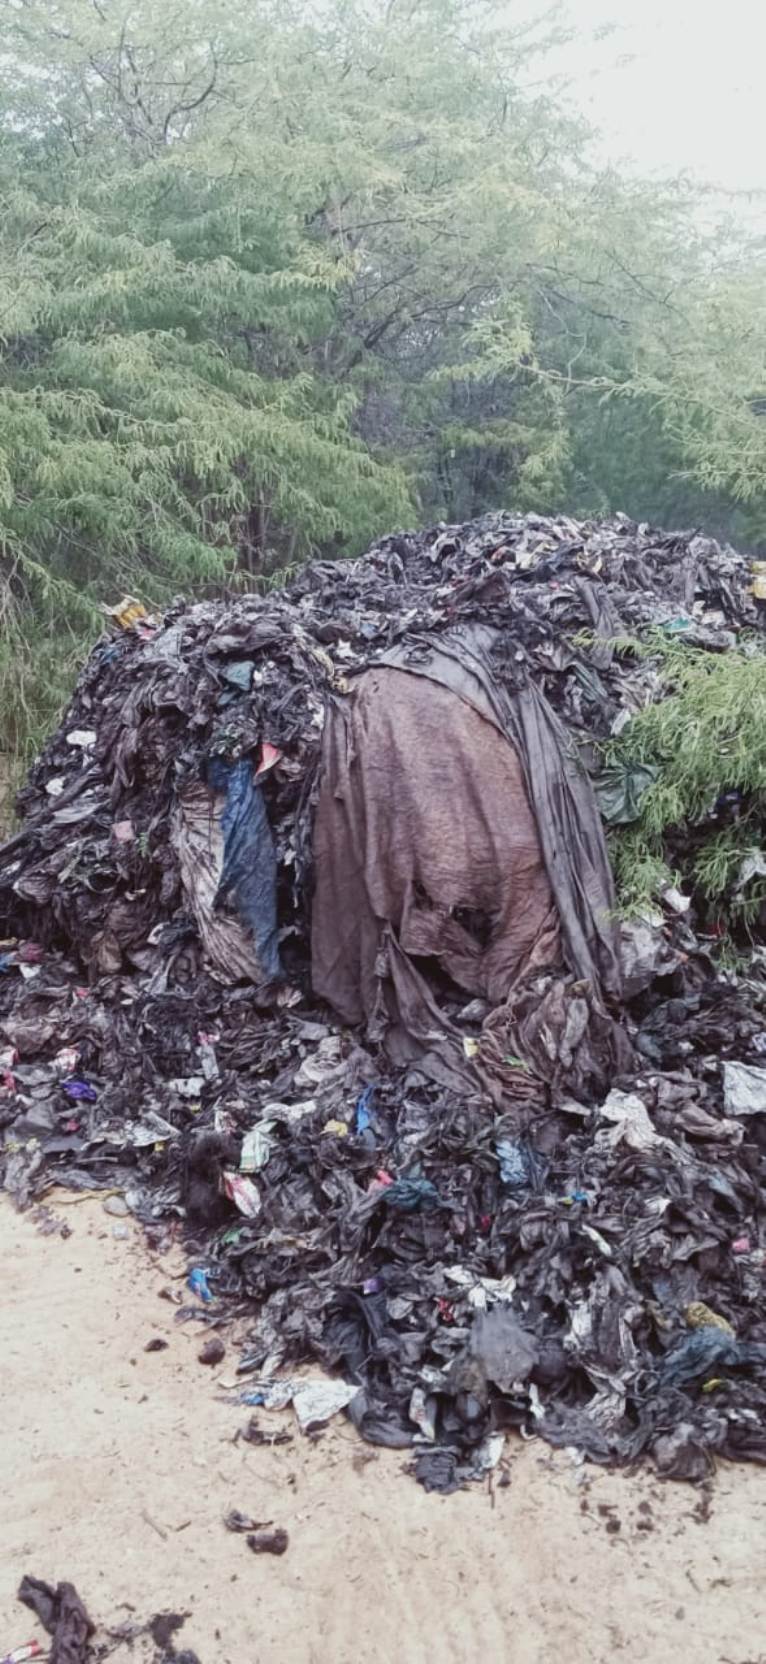 Faridabad: Dumping of waste in Aravallis on the rise